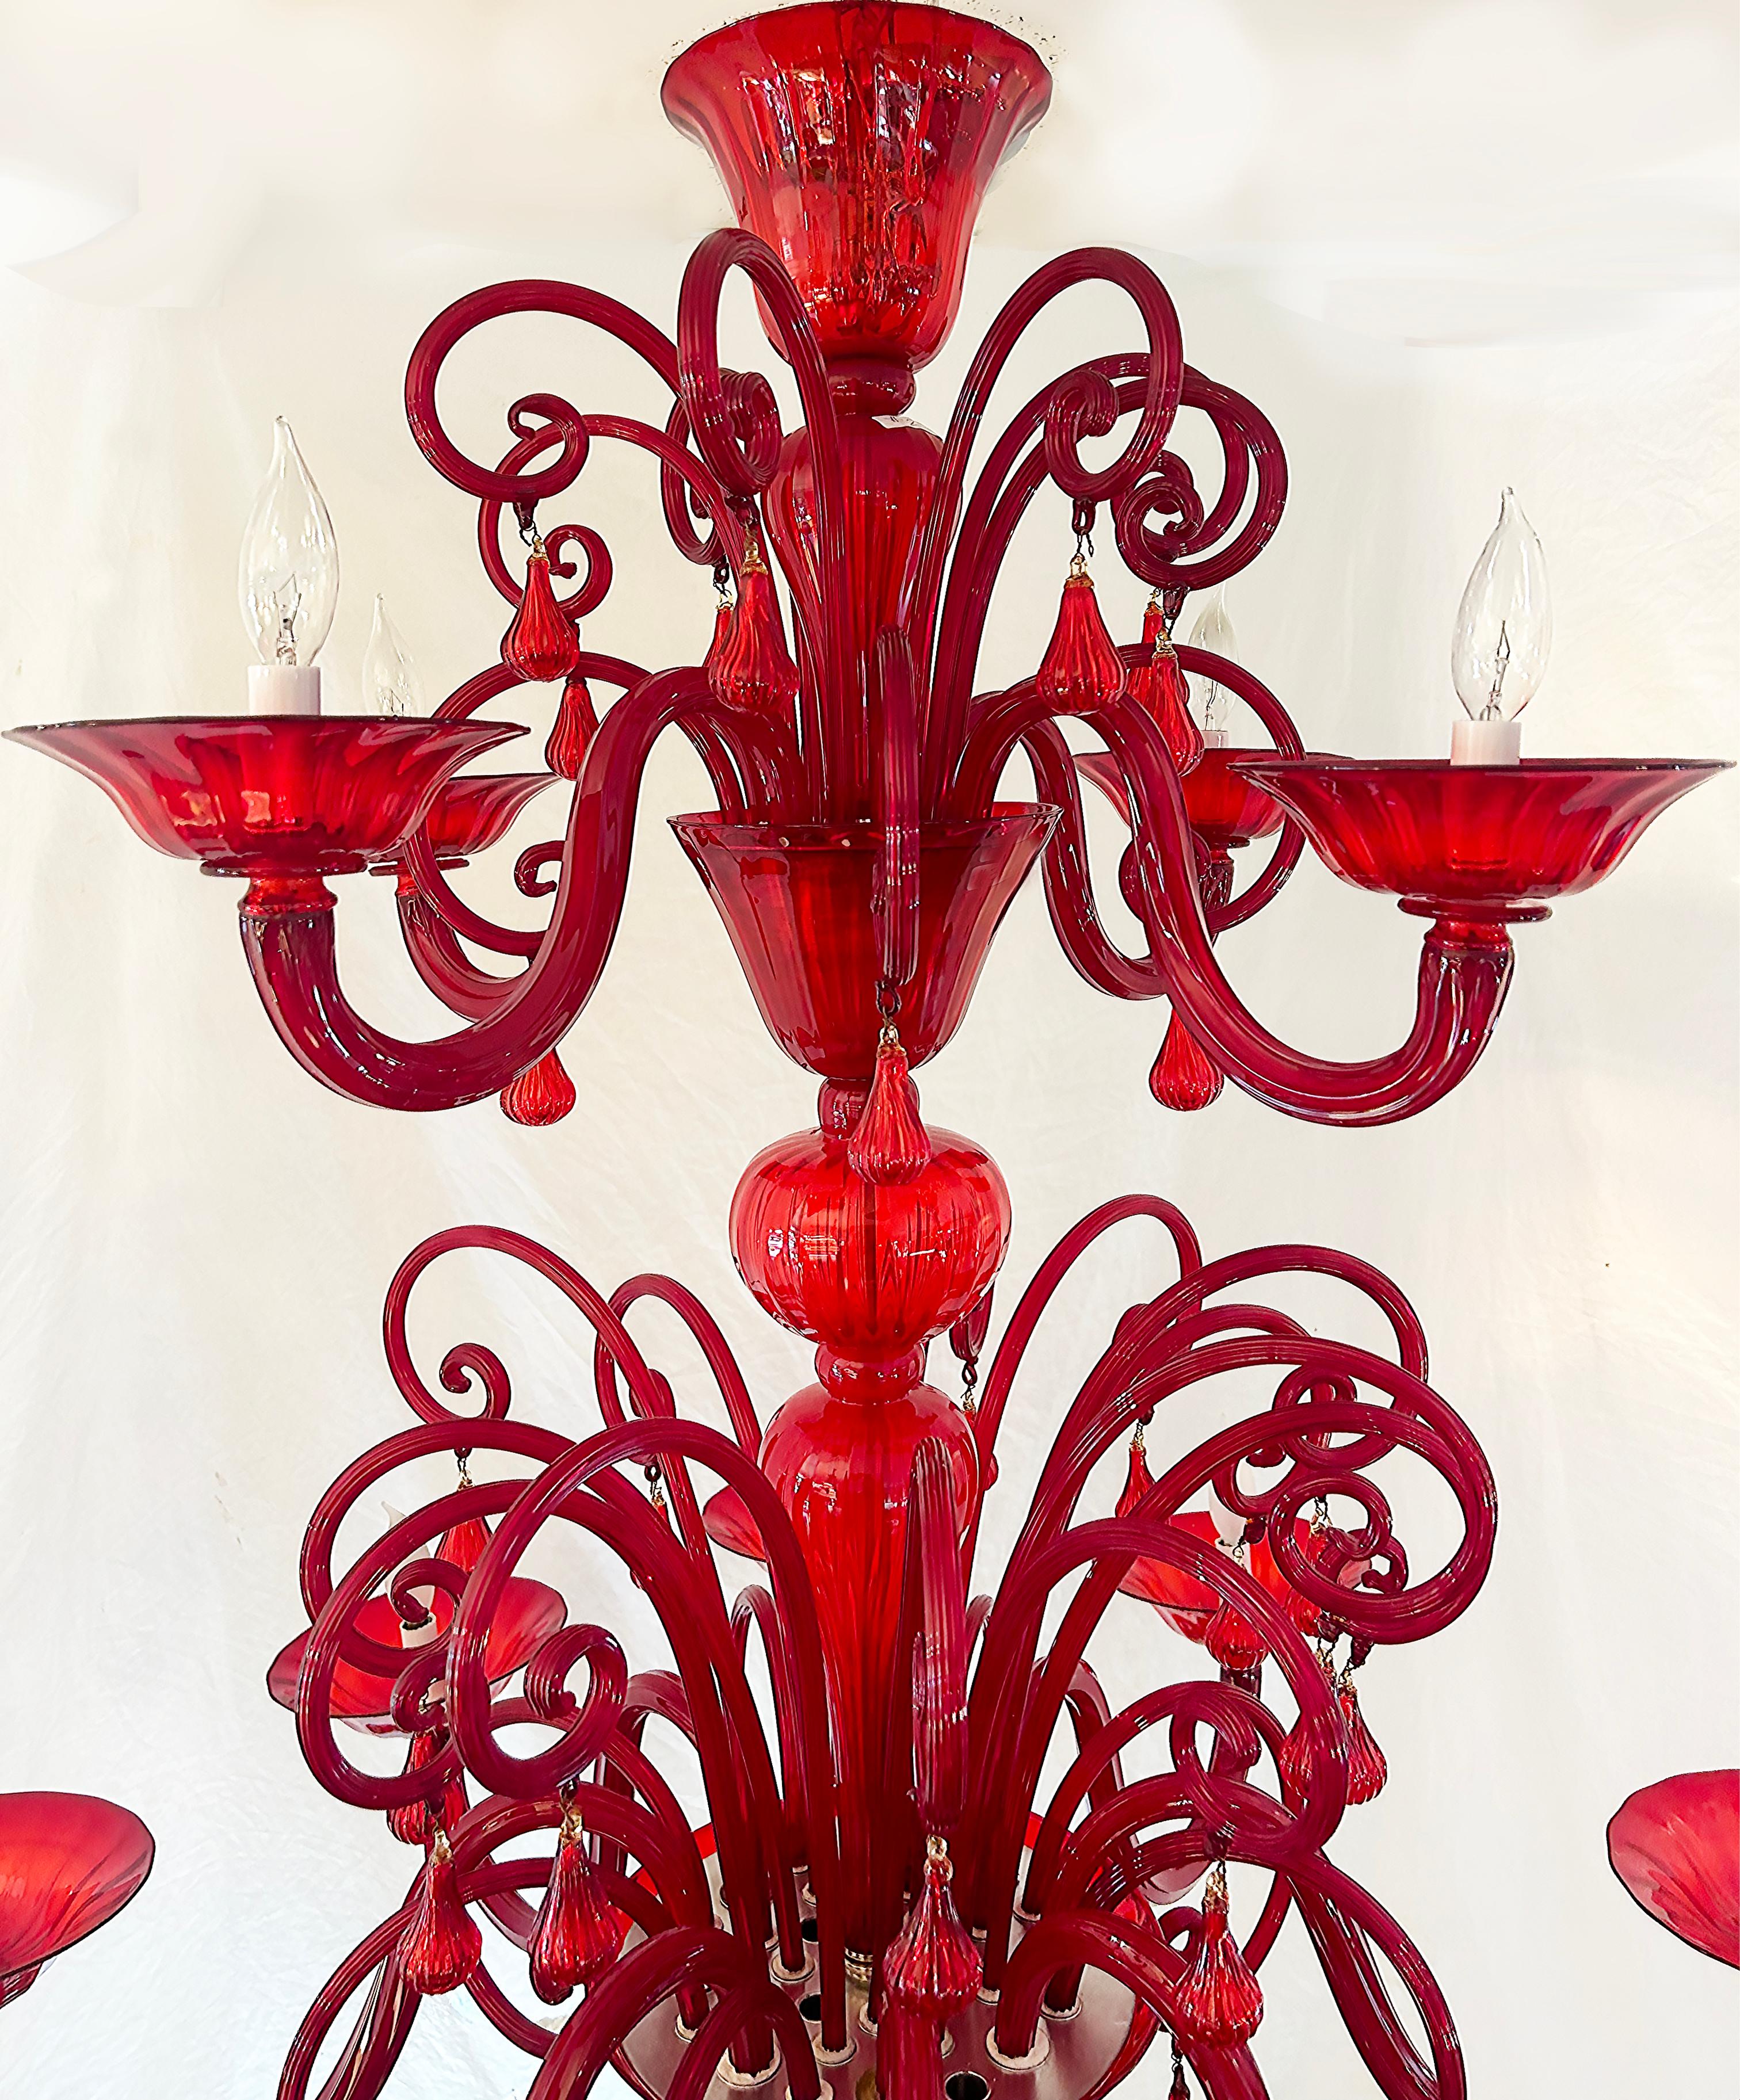 Monumental Red La Murrina Murano Glass Two-Tiered 10 Light Chandelier, Rewired

Offered for sale is a very large ruby-red 10-light Murano glass chandelier by La Murrina Italy. The chandelier is ornate with whimsical hand-blown balls and curls with